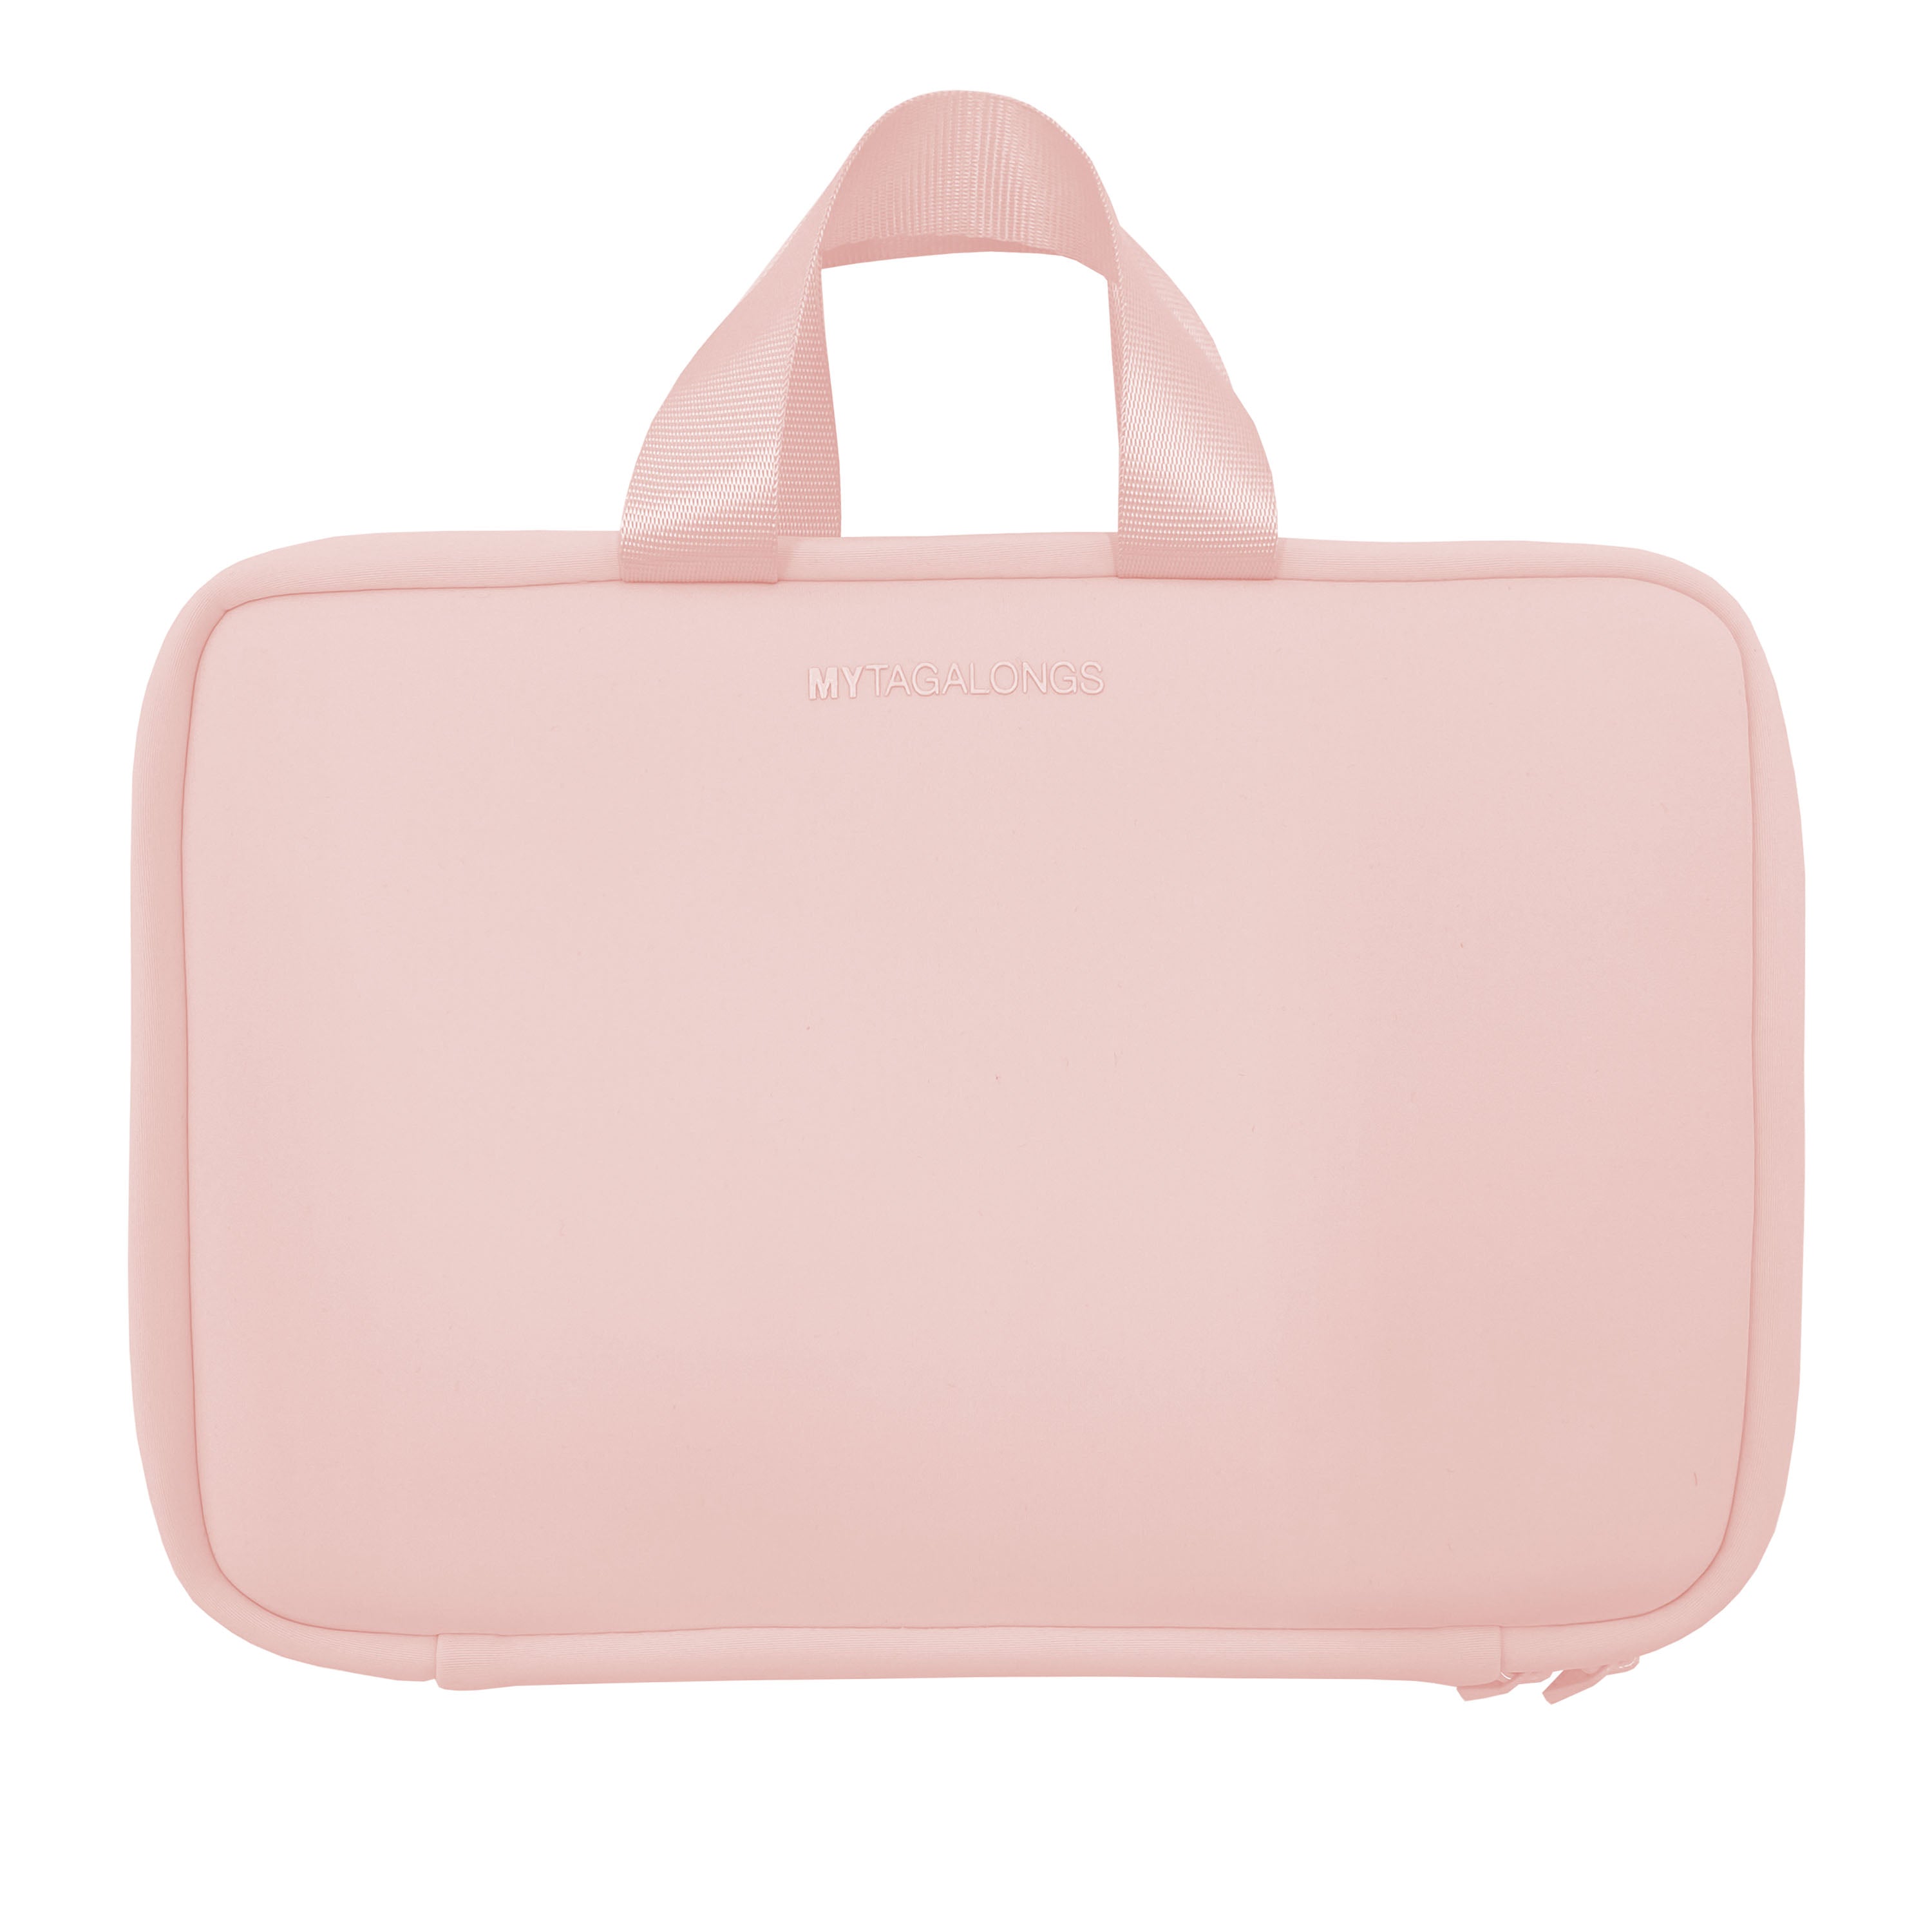 pink hanging travel toiletry case